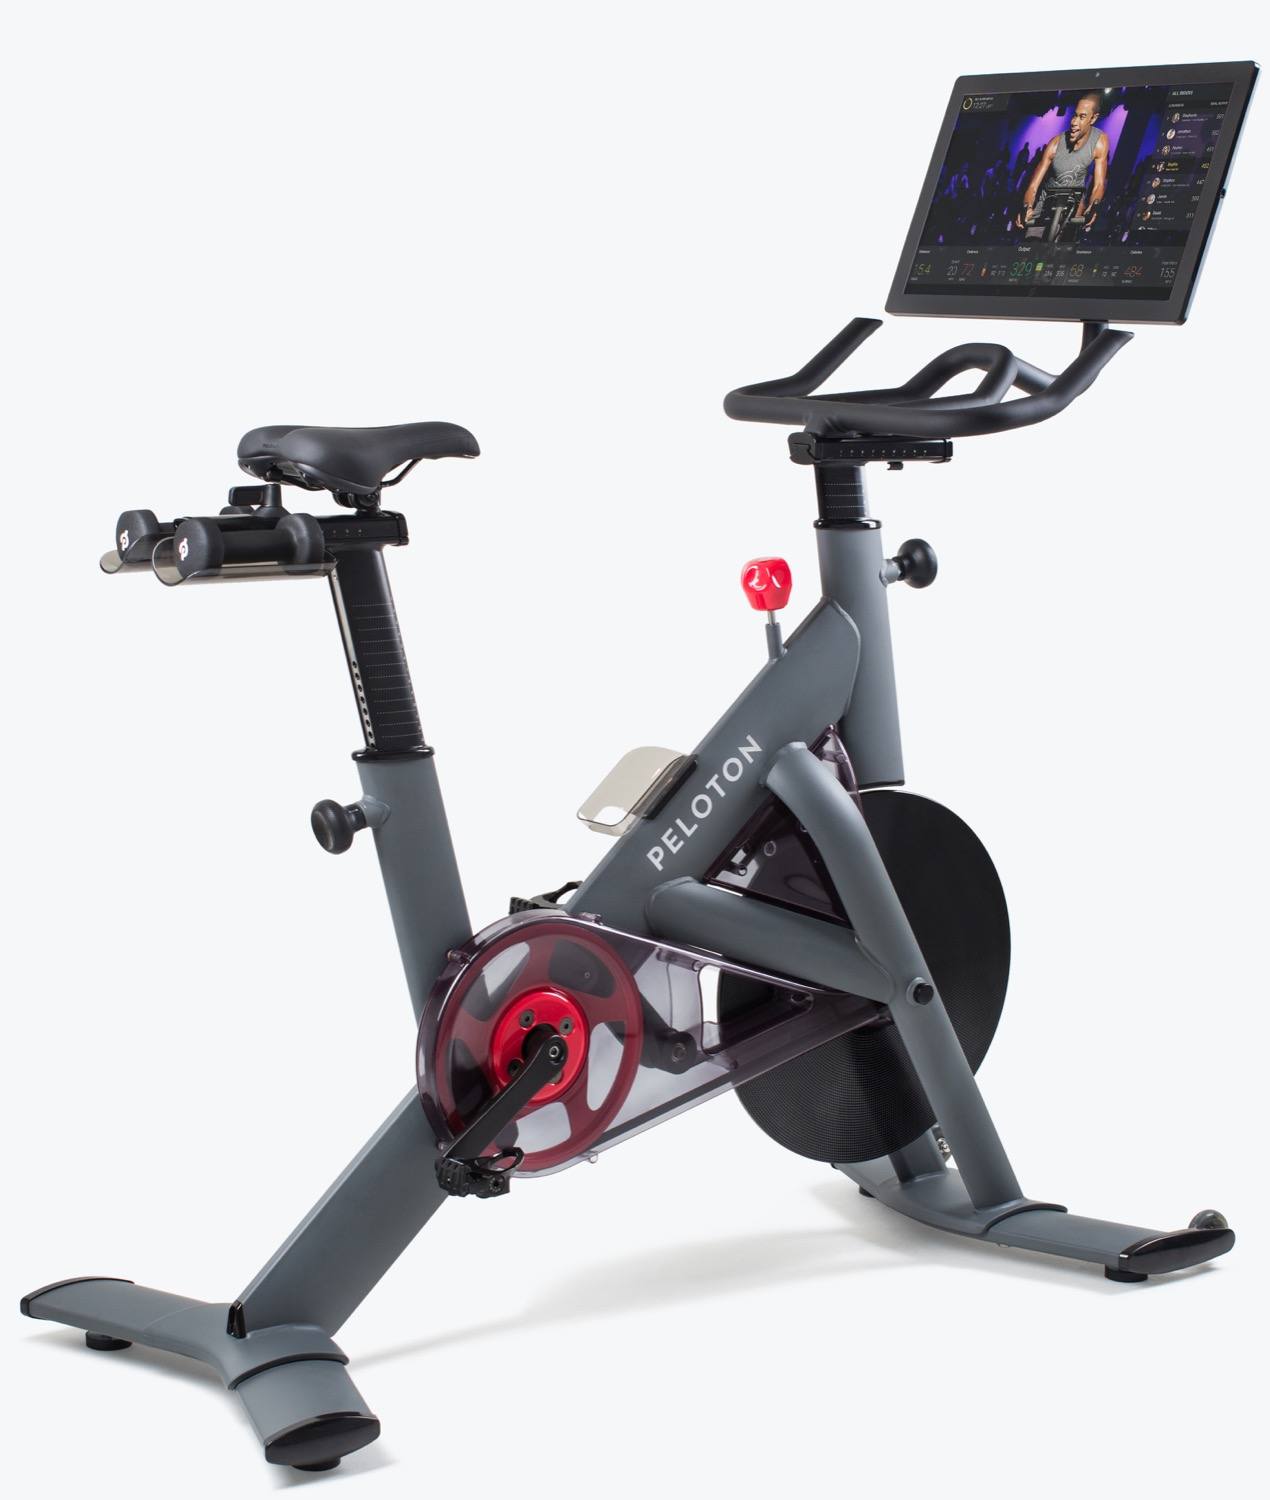 Black and Red Peloton workout bike with HD display screen